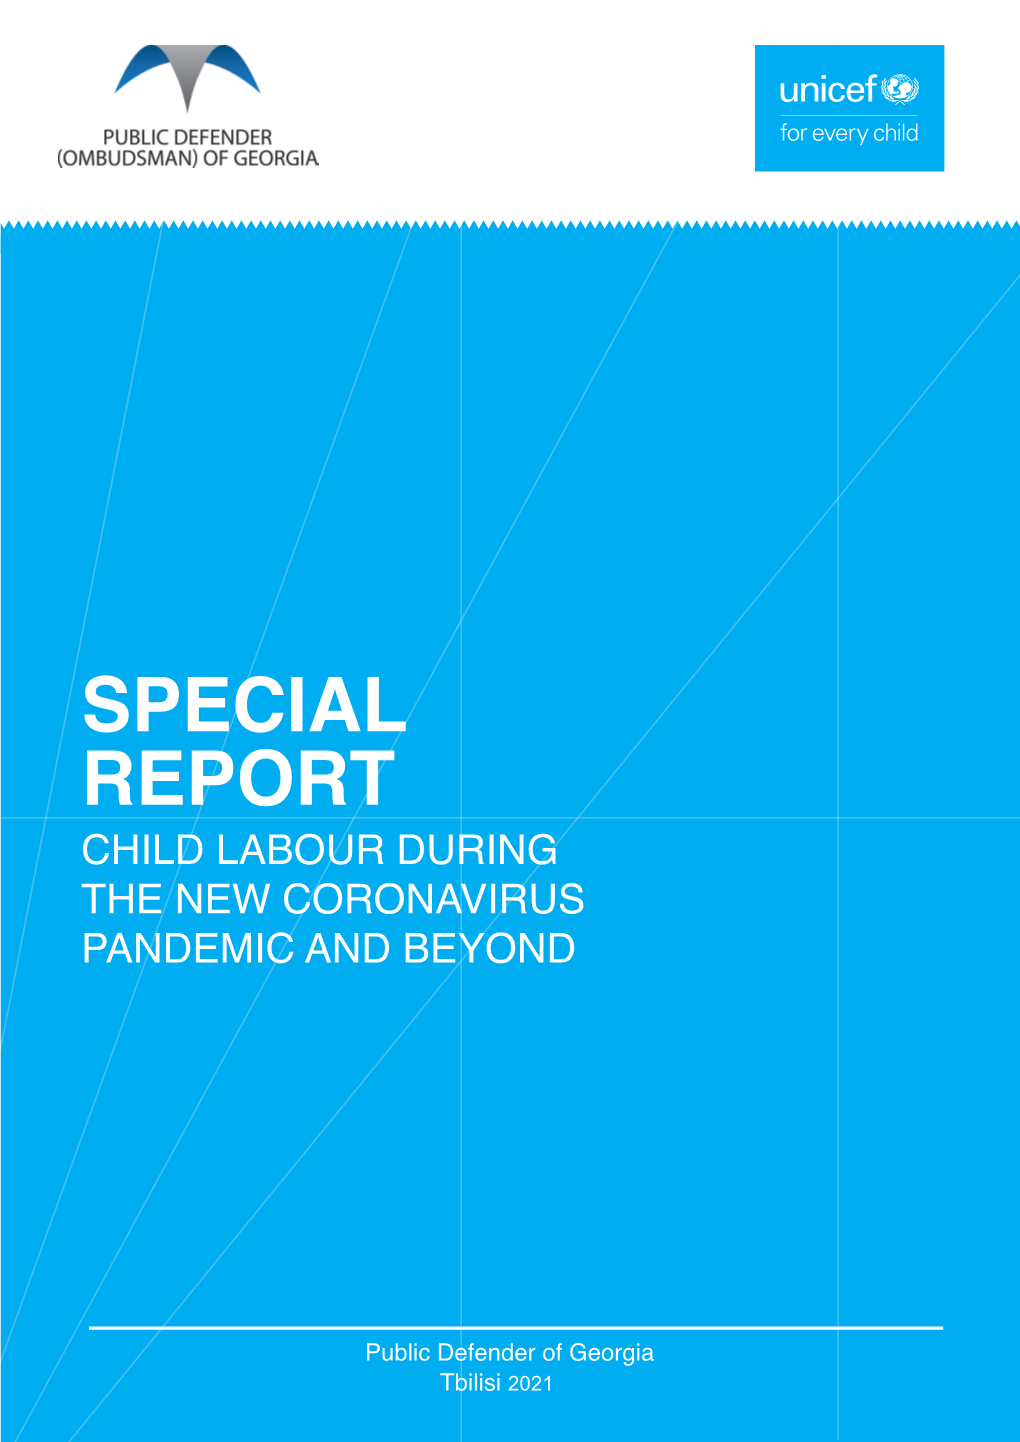 Special Report Child Labour During the New Coronavirus Pandemic and Beyond